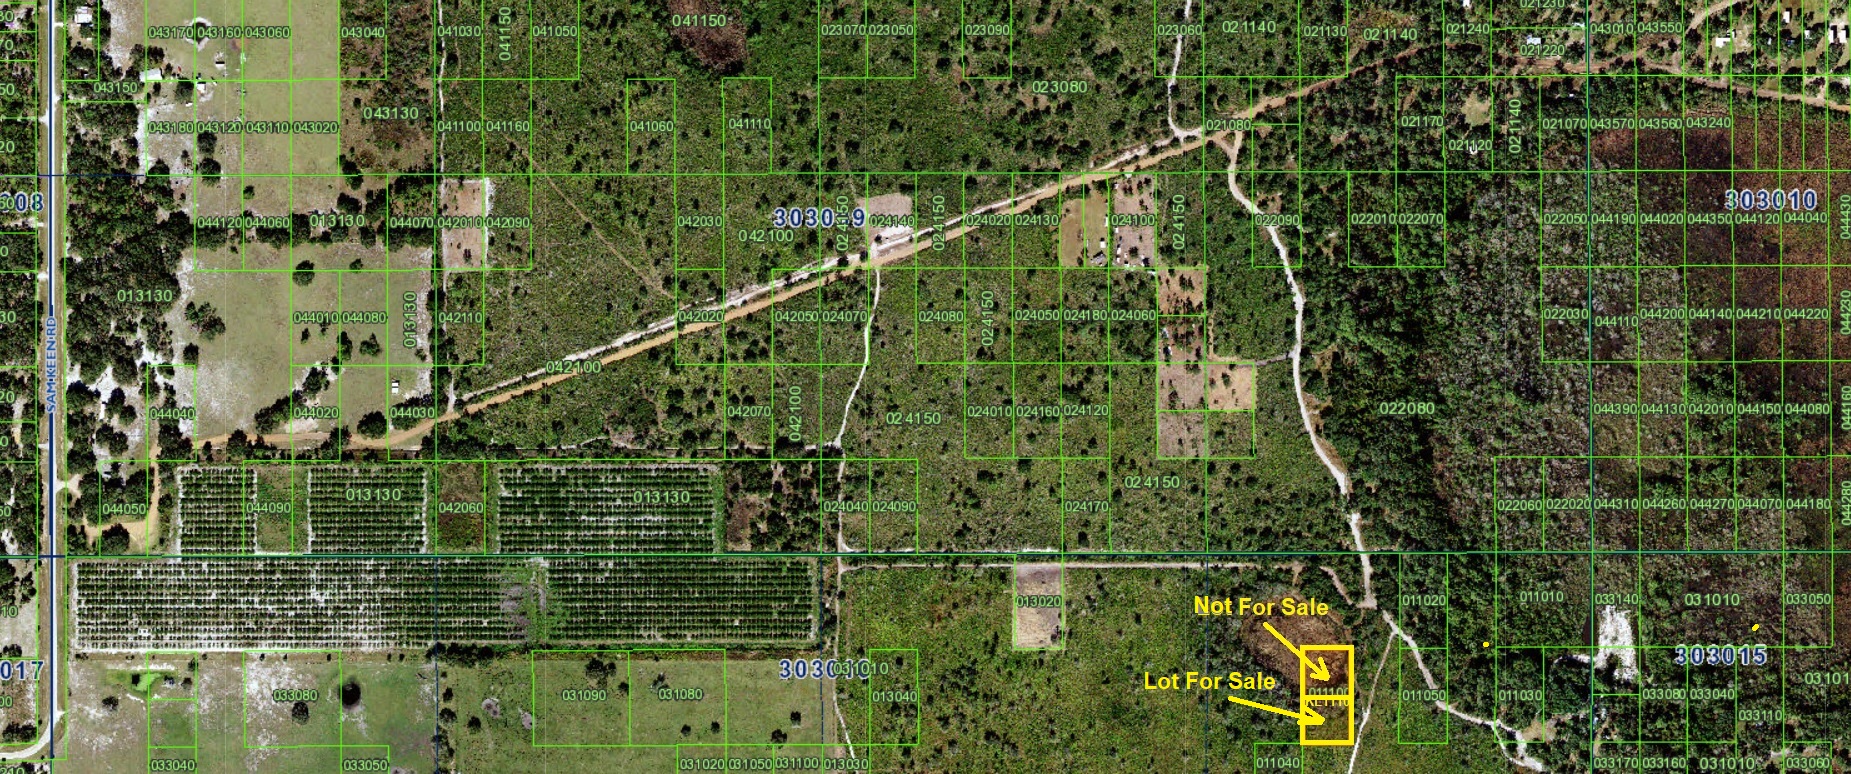 Kissimmee Lakes Recreational Property Owners Association KLRPOA Land For Sale Atving Campimg Lot